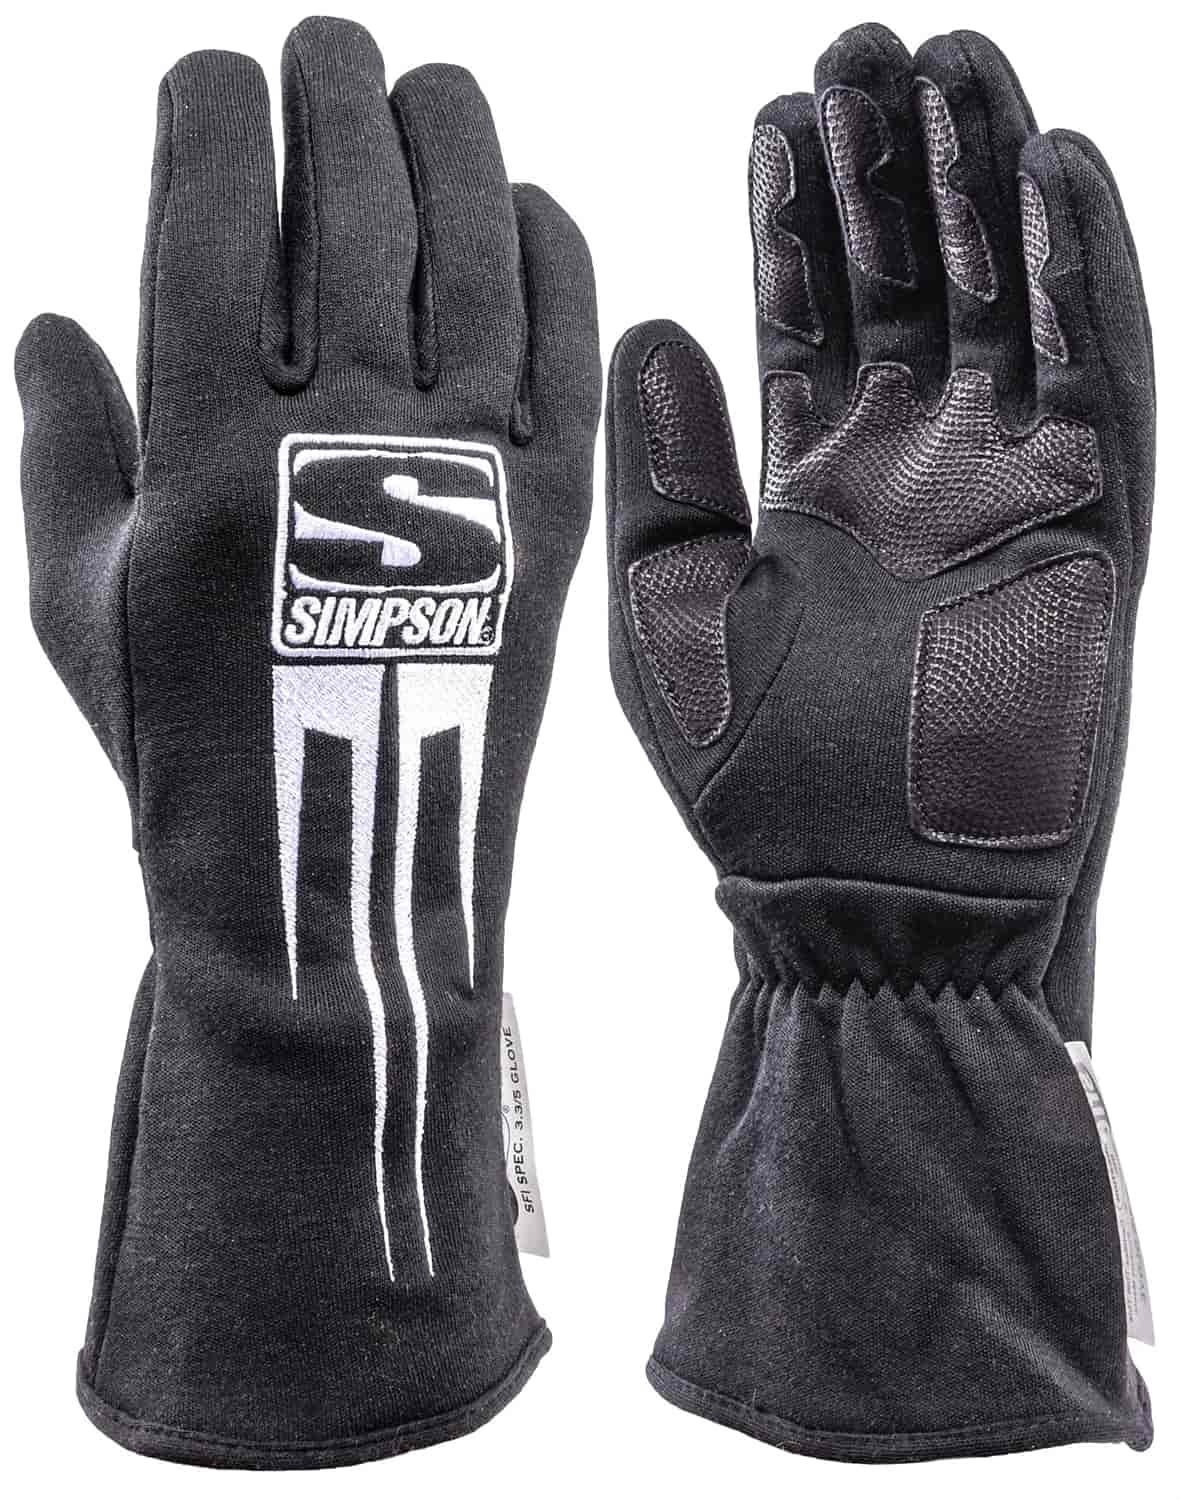 Predator Driving Gloves SFI 3.3/5 Rated